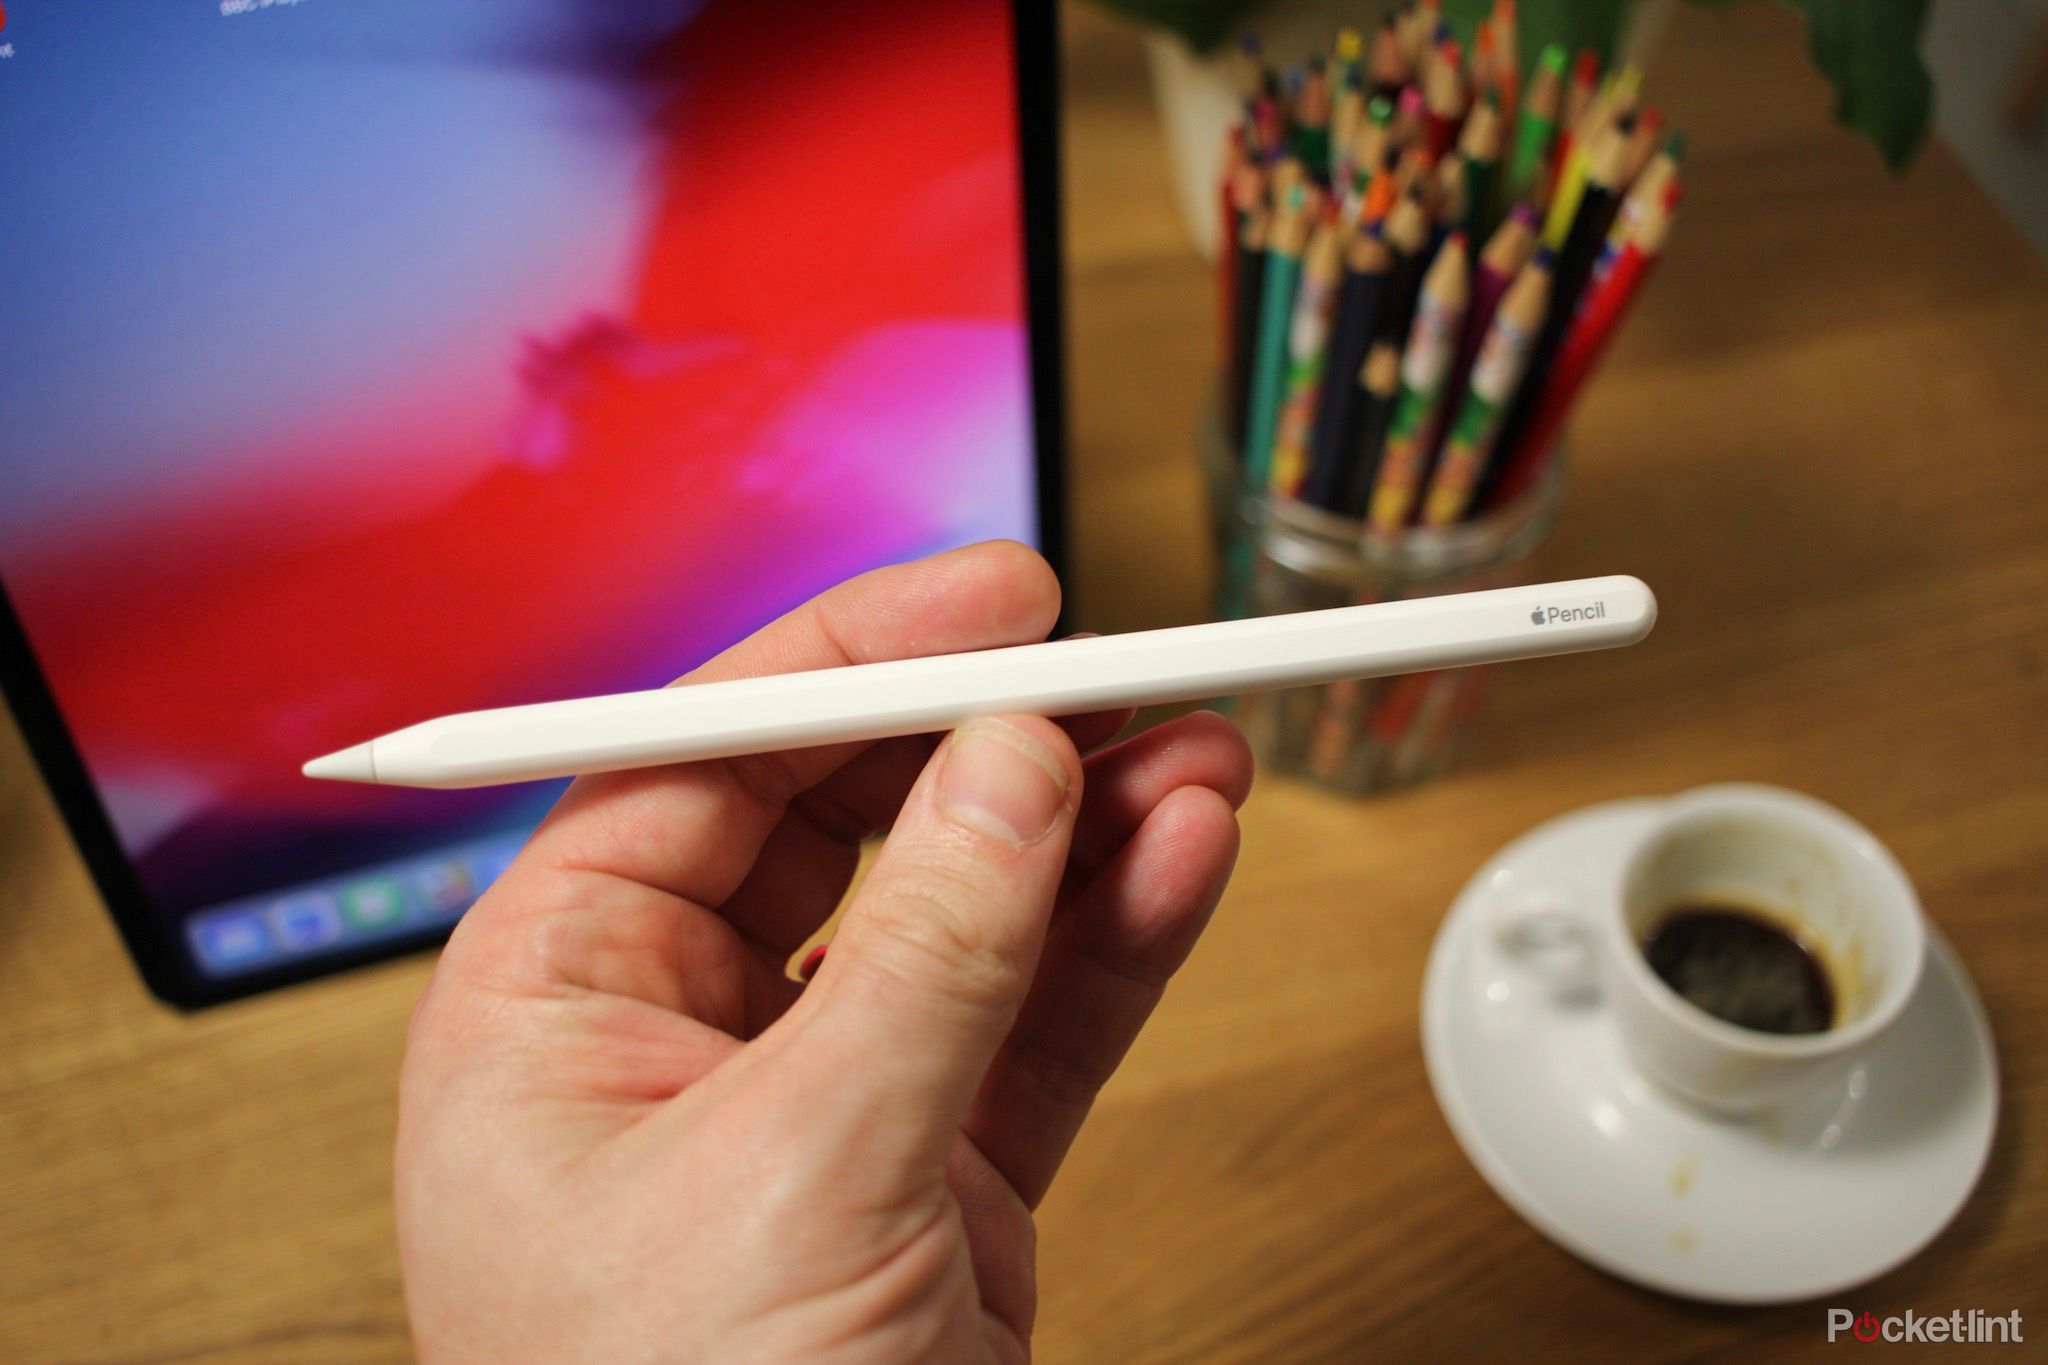 Should you buy an Apple Pencil on Prime Day?